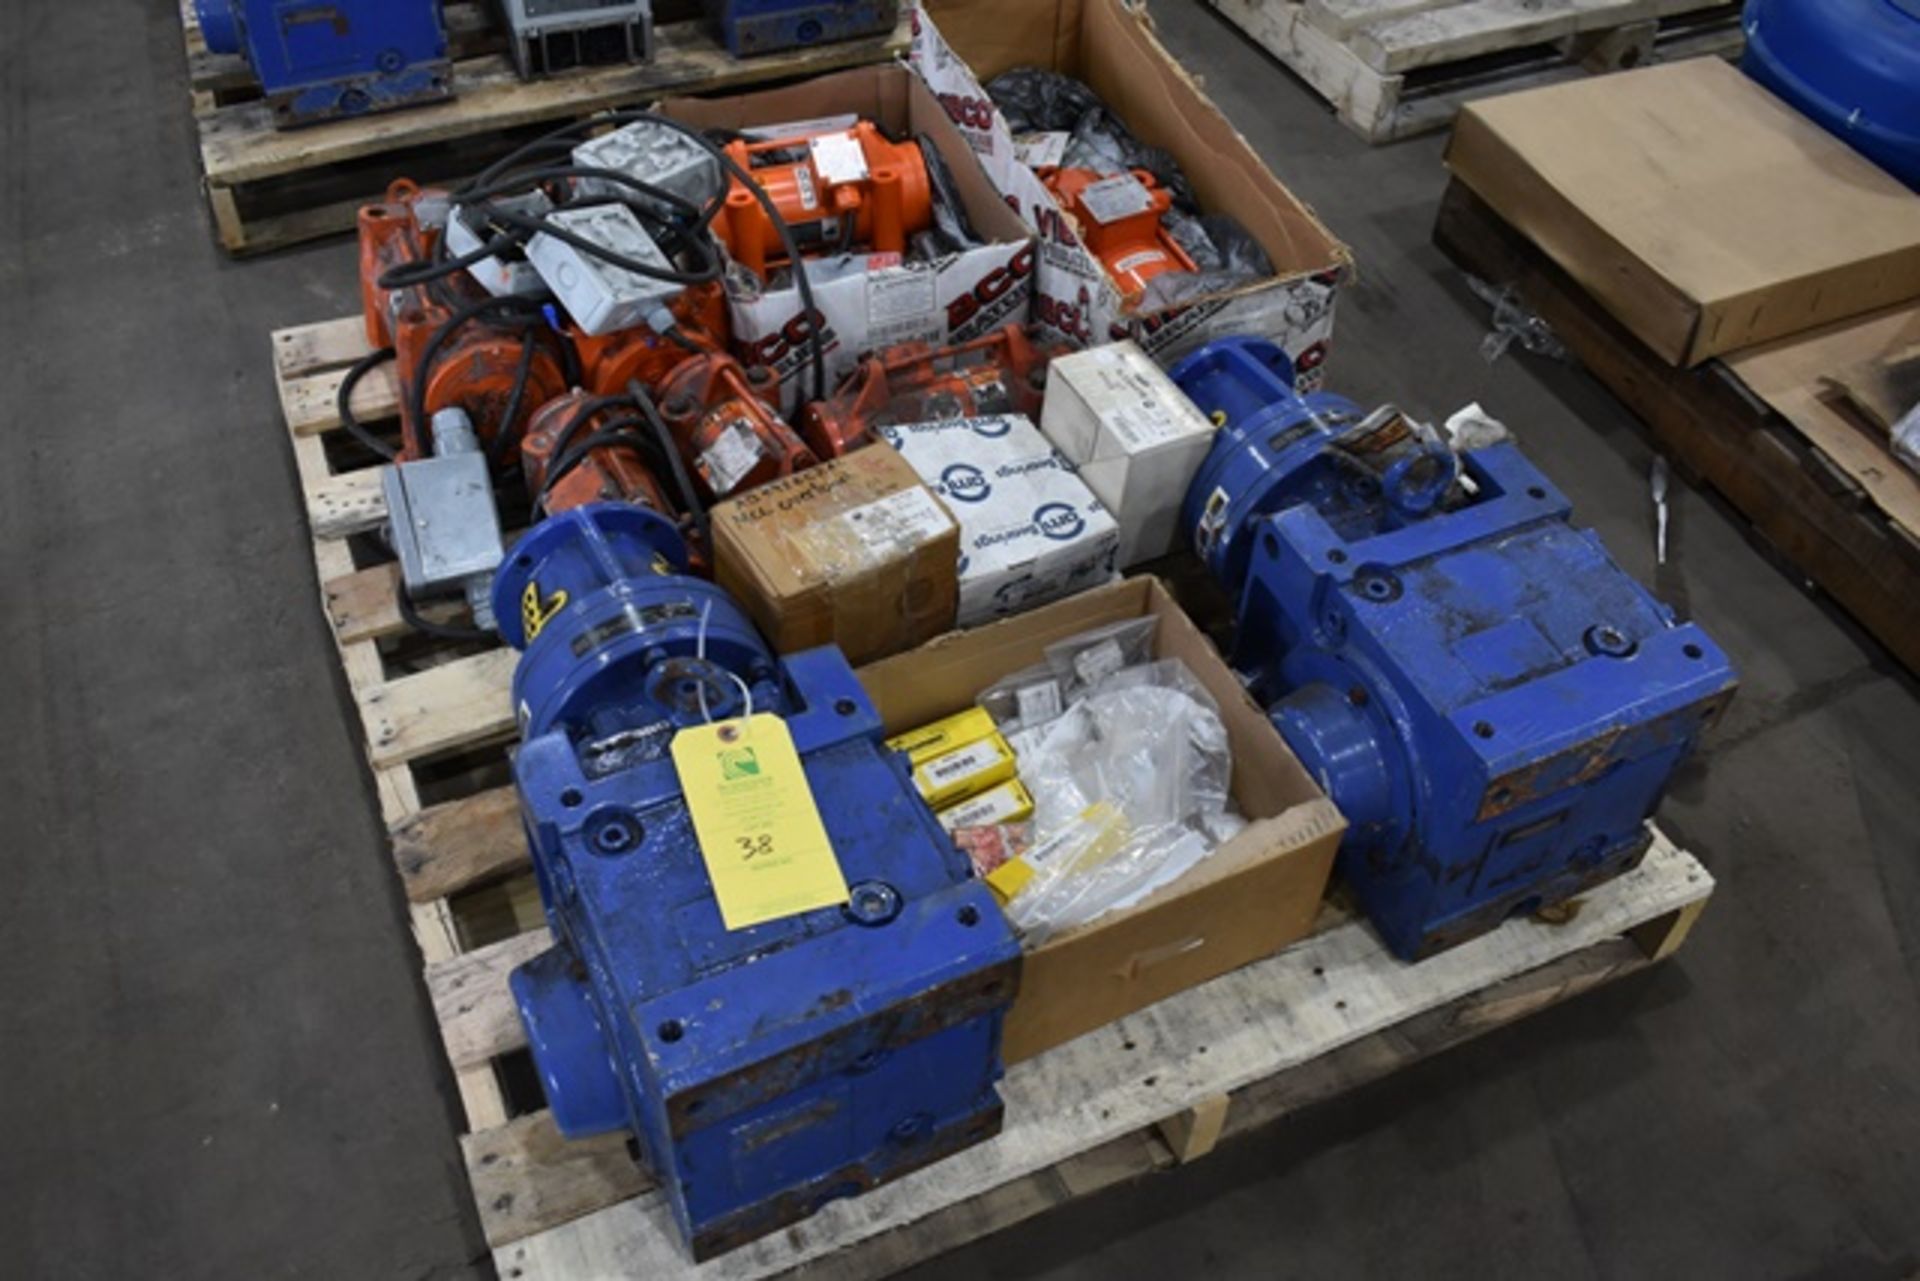 (2) Sumitomo RD1042 Gear Reducers, (7) Vibco Vibratory Motors, Assorted Bussmann Components